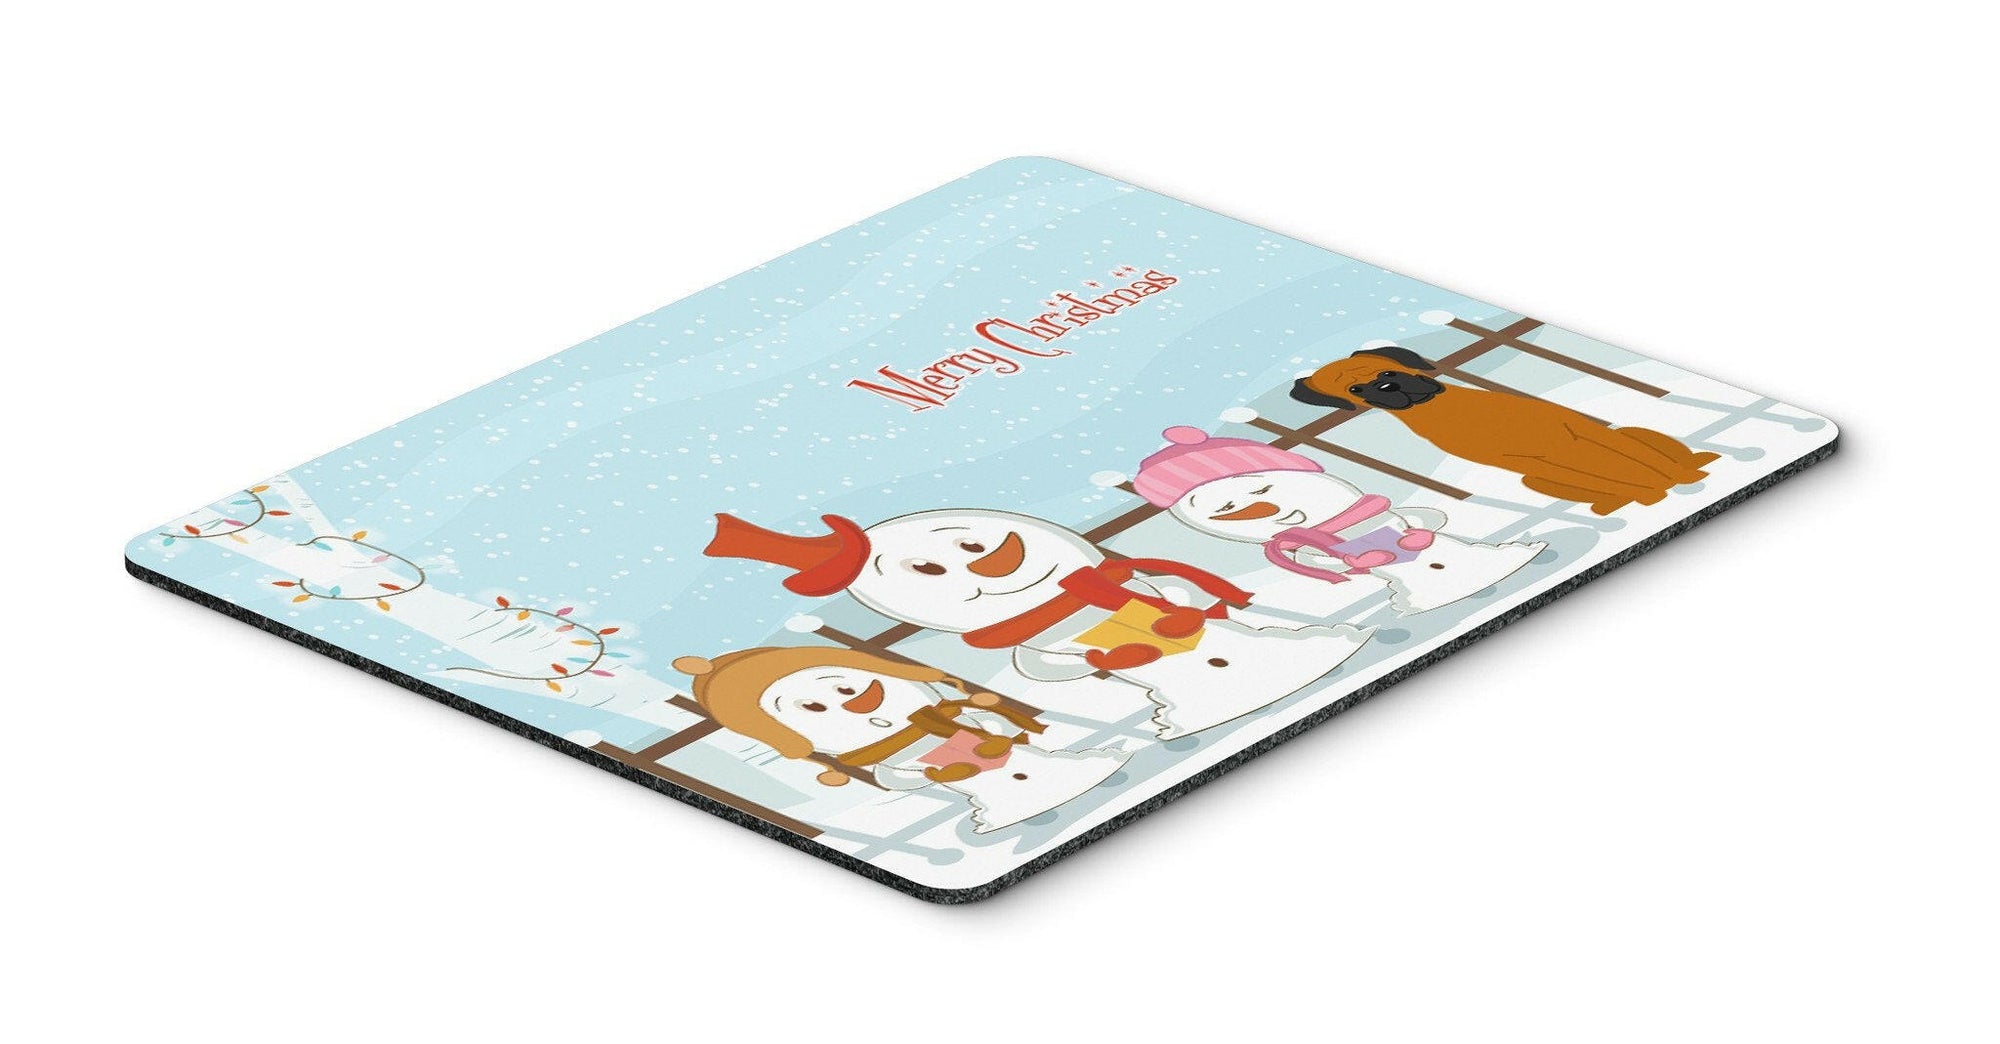 Merry Christmas Carolers Fawn Boxer Mouse Pad, Hot Pad or Trivet BB2446MP by Caroline's Treasures